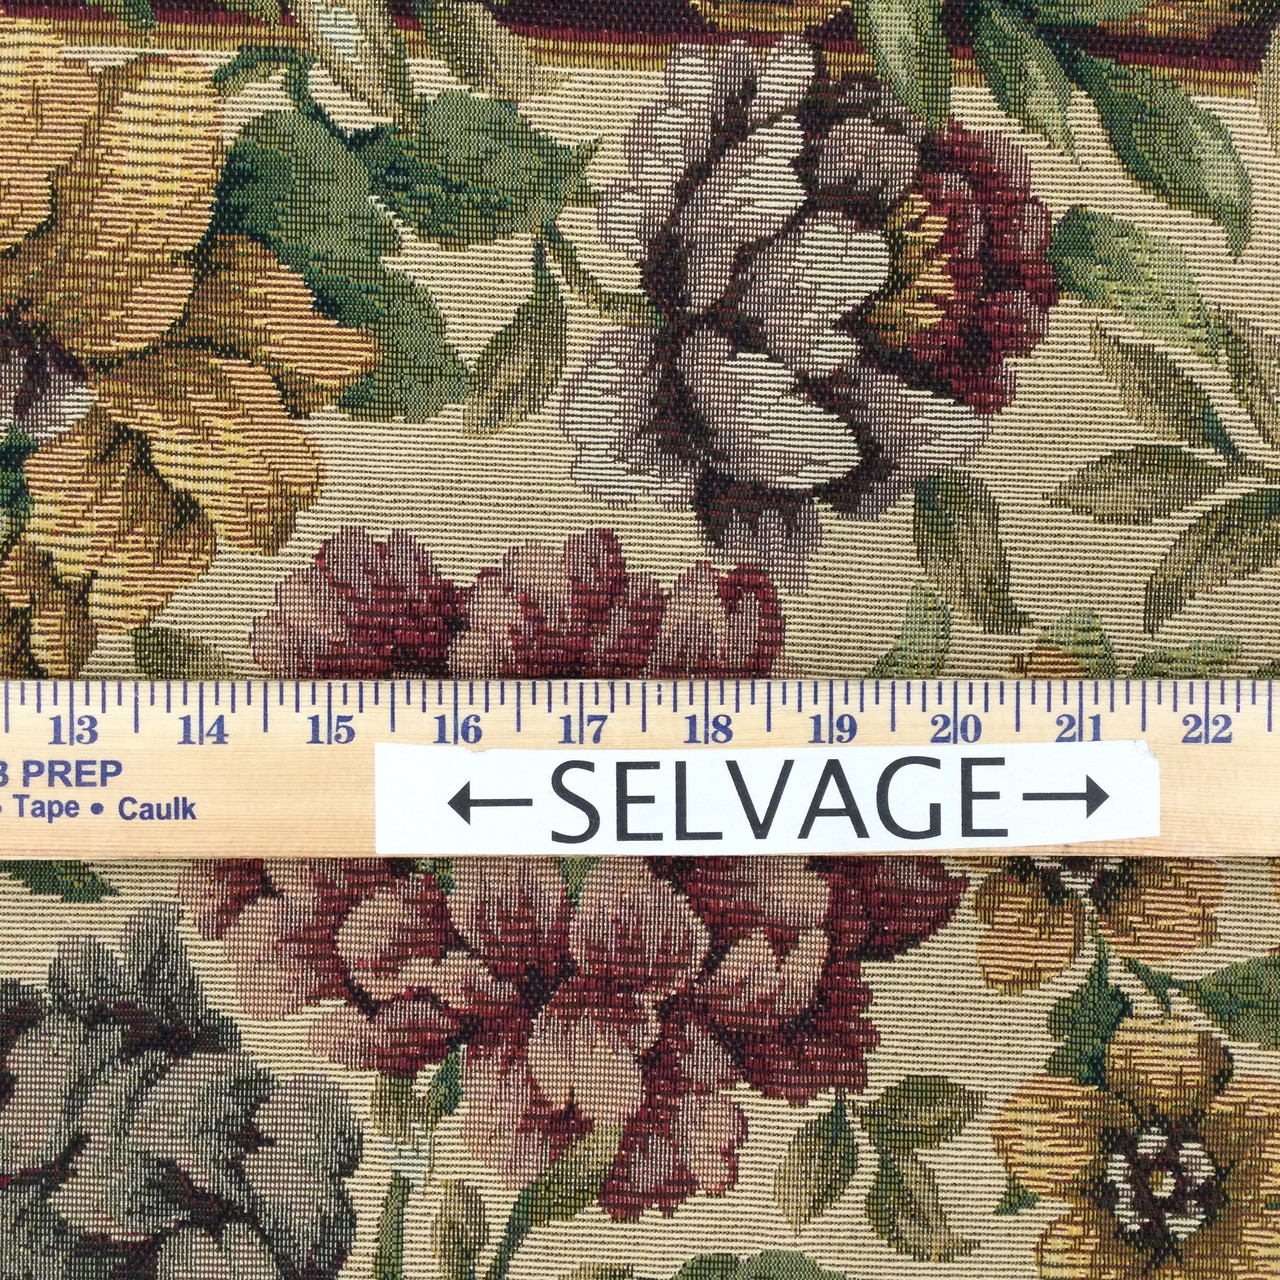 Floral Tapestry in Green, Red, Blue, Brown, Upholstery / Slipcover Fabric, 54 Wide